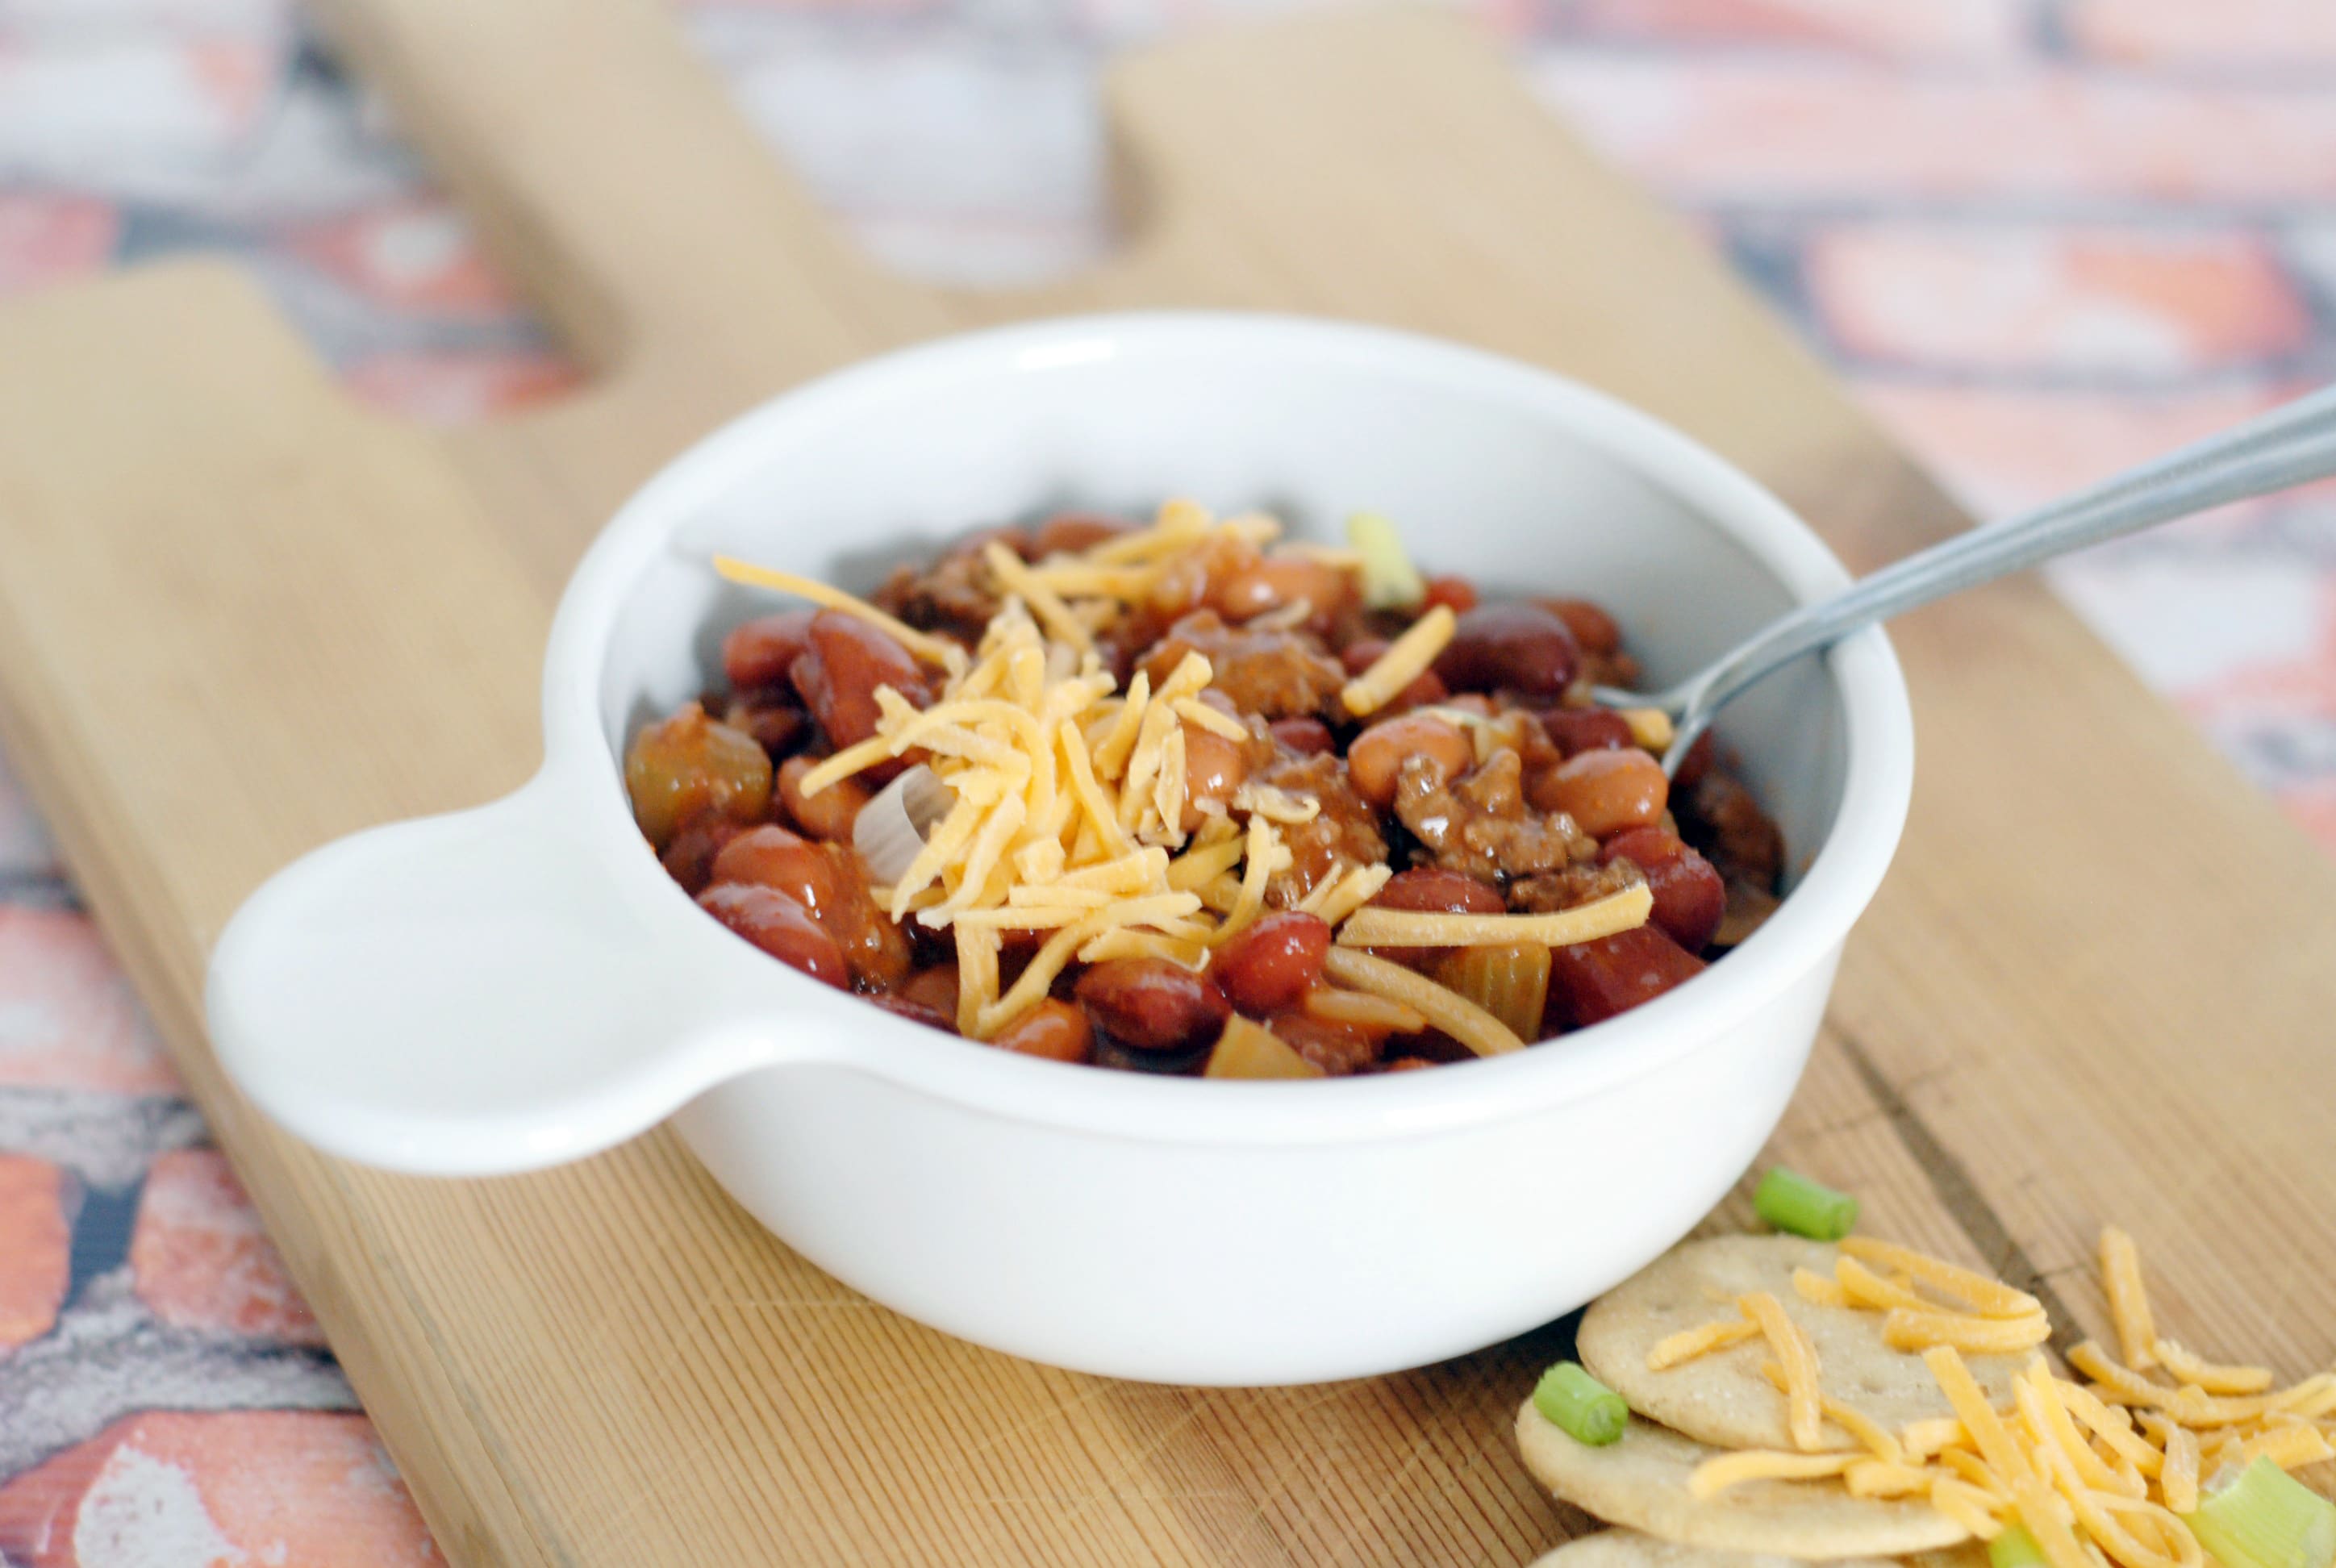 Get Wendy's Chili For Just $2.25 Per Can At Publix (Regular Price $4.99) -  iHeartPublix